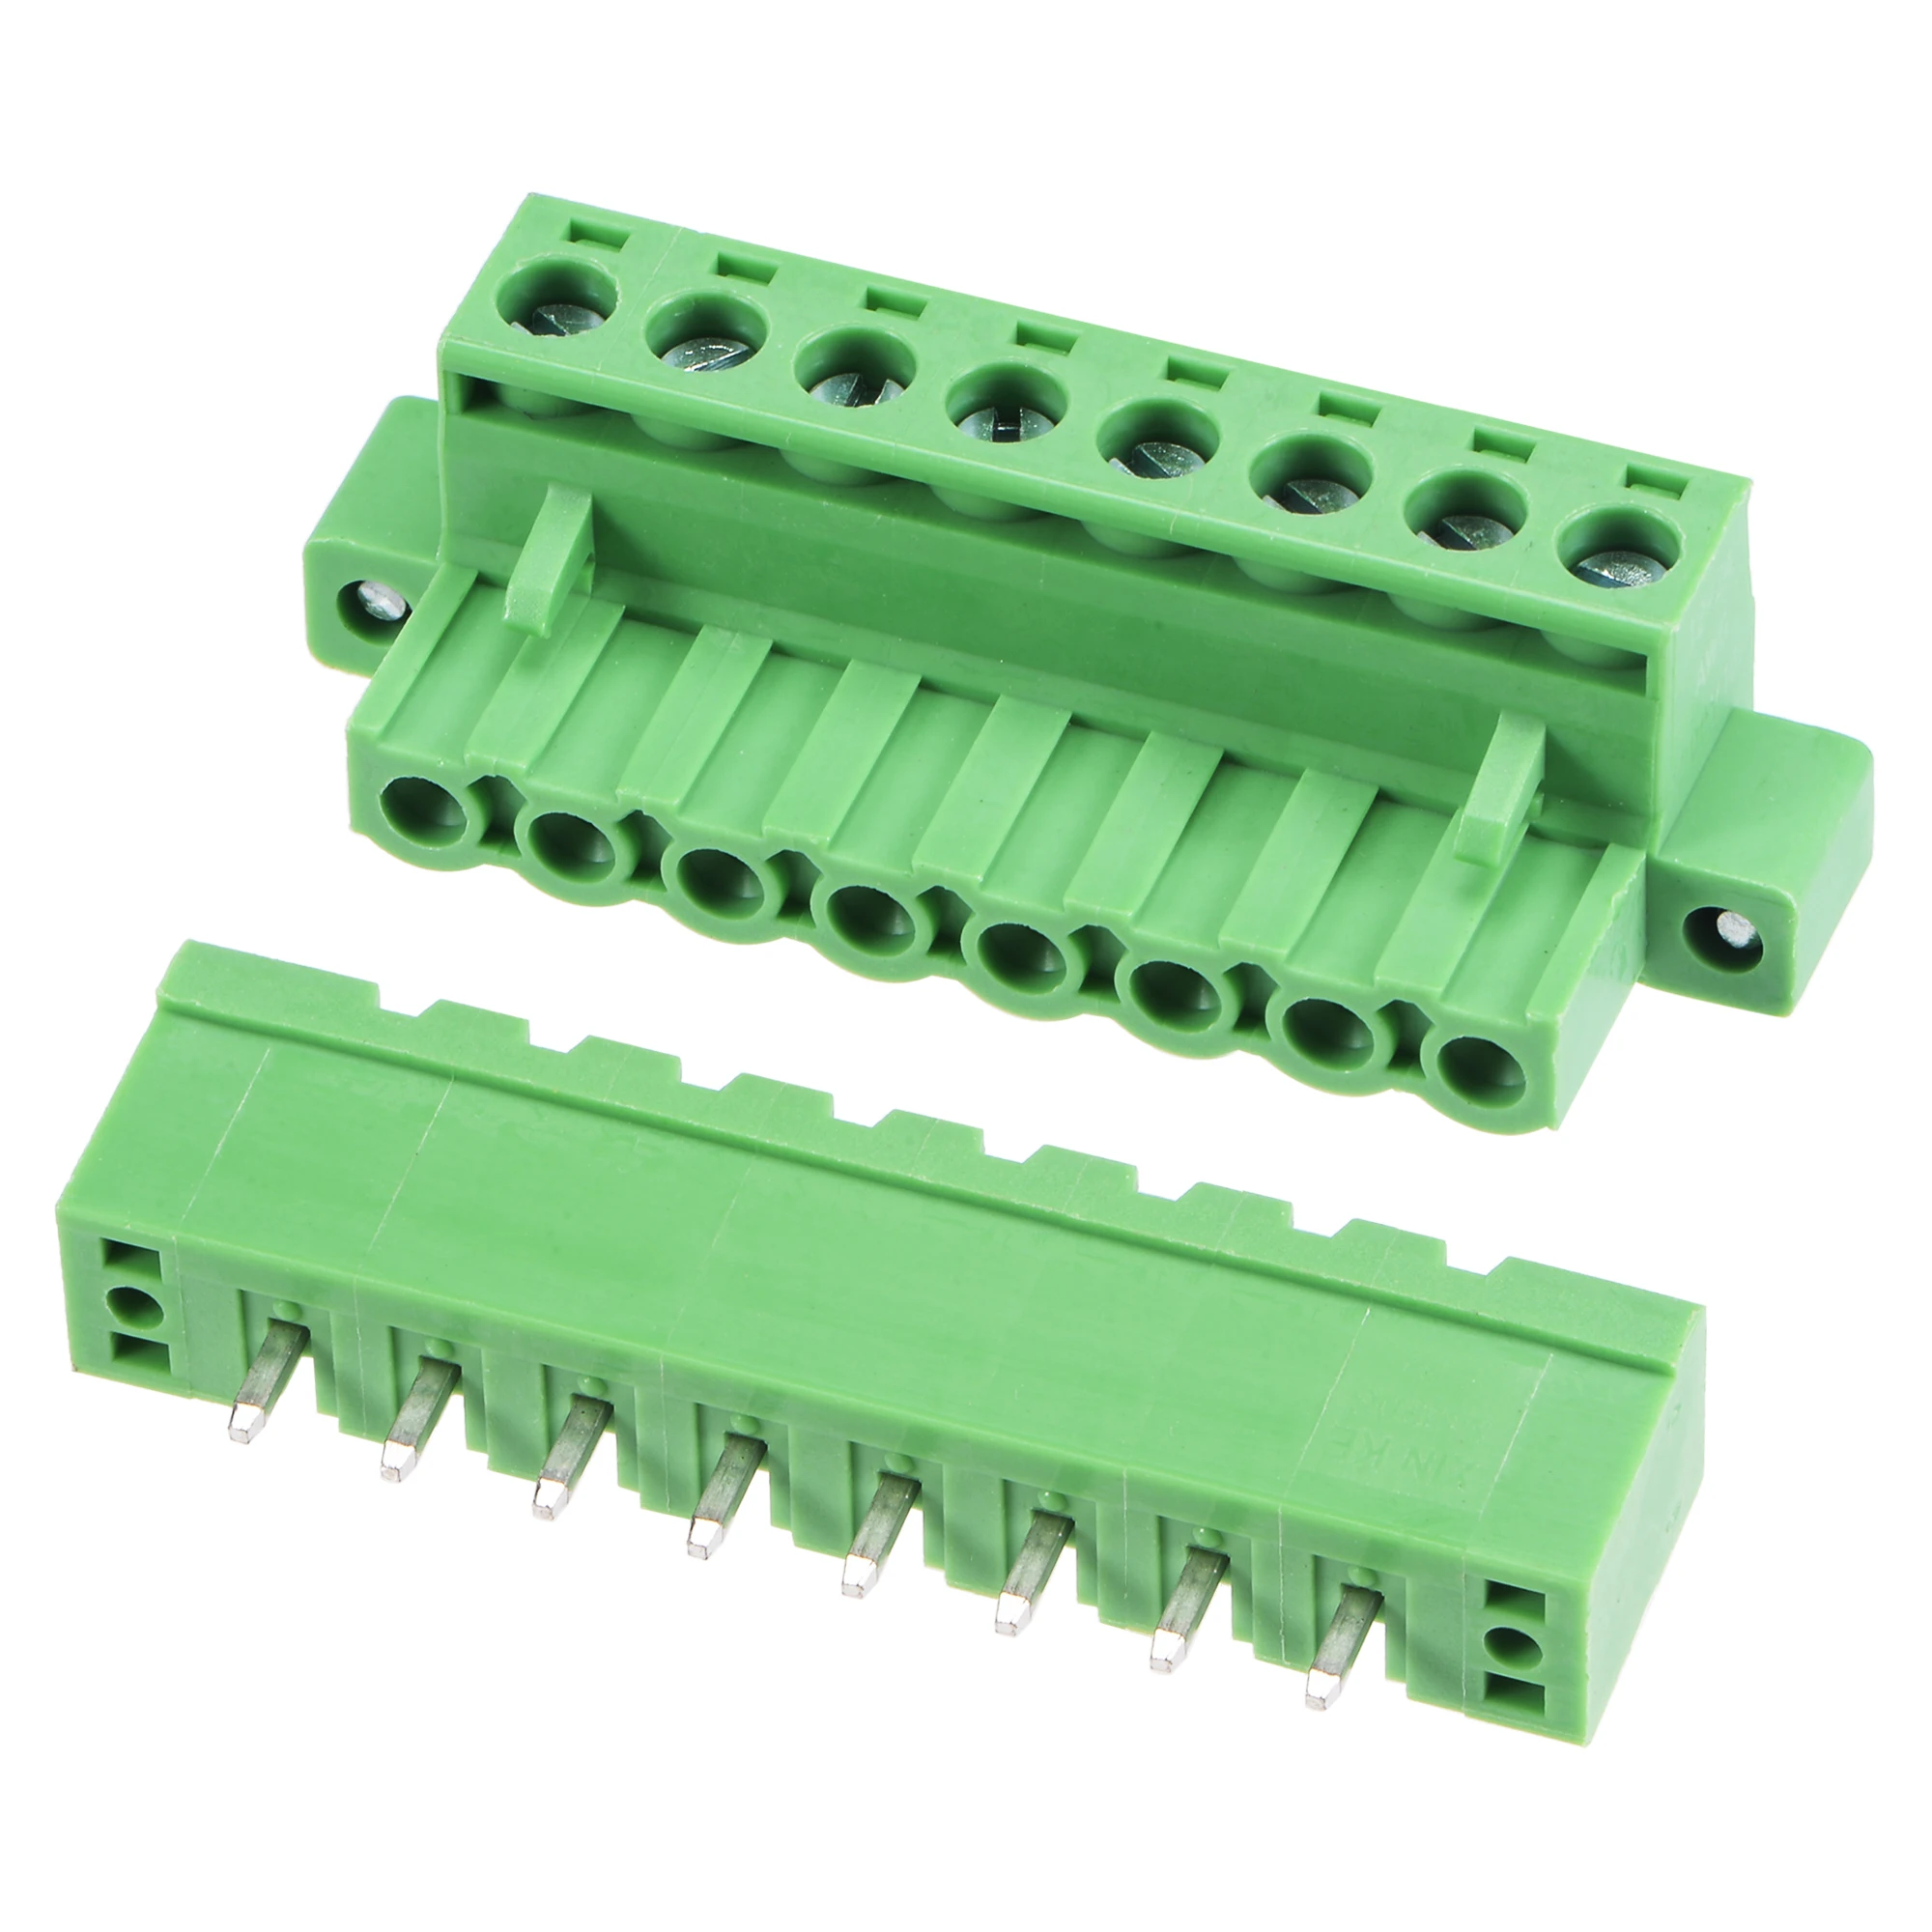 uxcell 2 Pin 5.08mm Pitch Male Female PCB Screw Terminal Block 5 Sets 